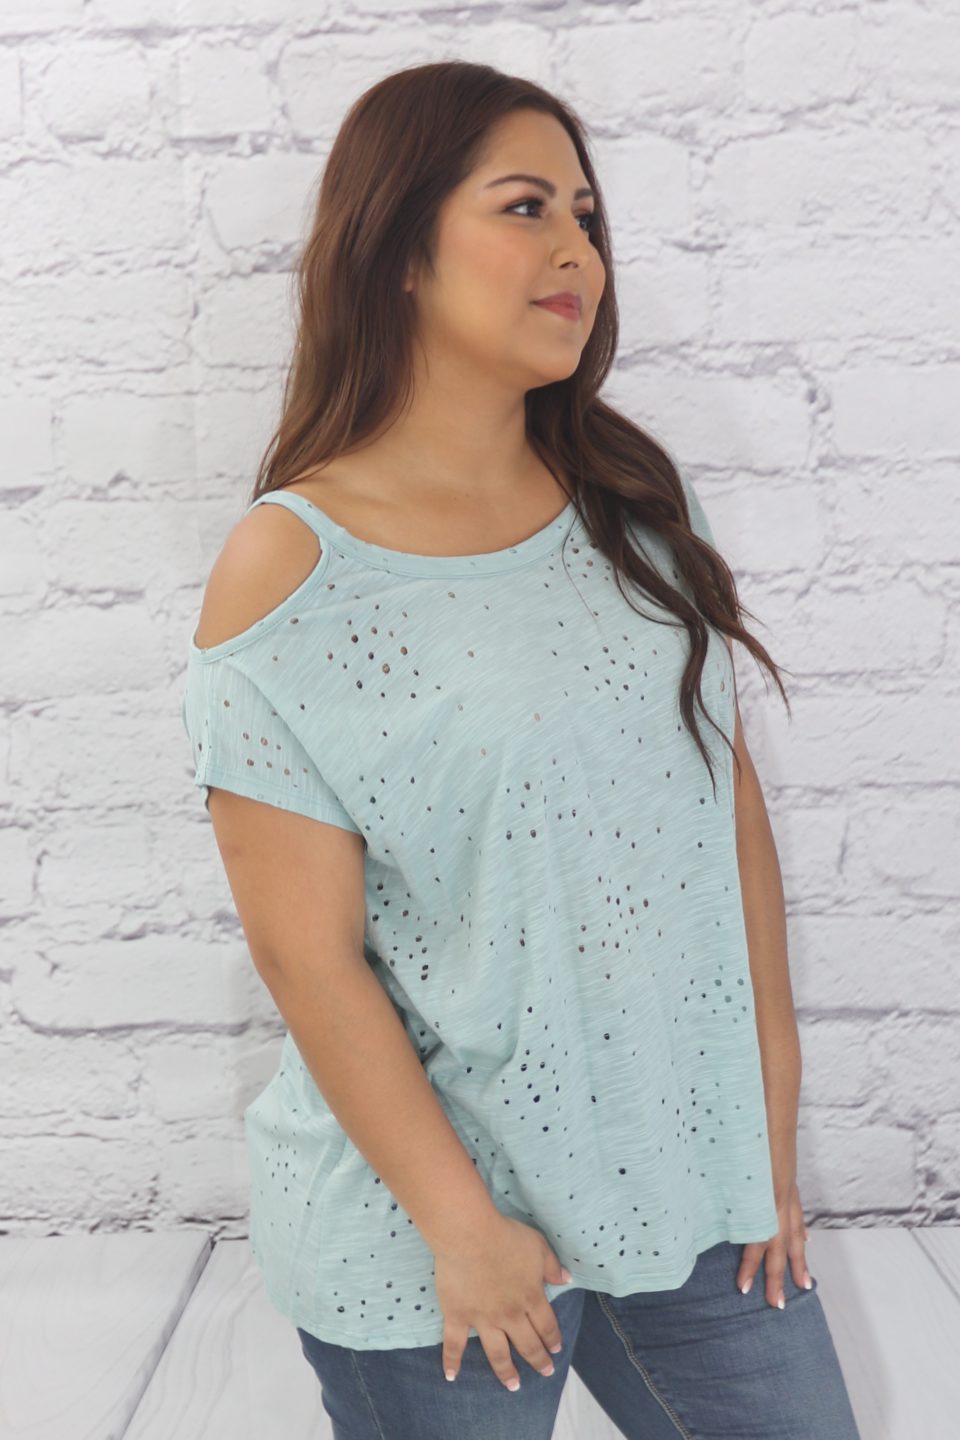 Short sleeve cold shoulders top with punched modal fabric  Ivy and Pearl Boutique   